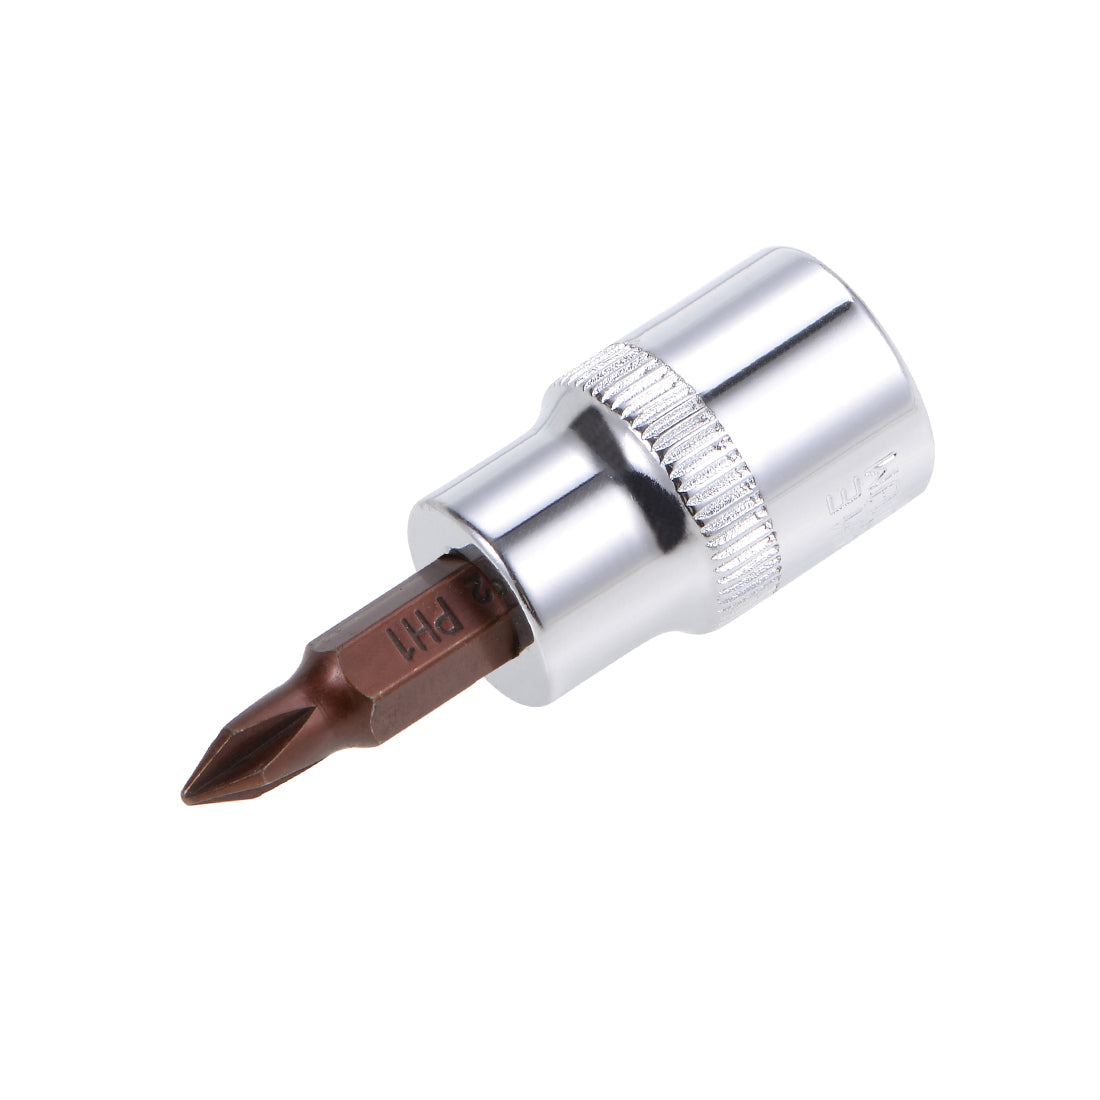 Uxcell Uxcell 3/8" Drive x PH3 Phillips Bit Socket, Standard Metric, S2 and Cr-V Steel